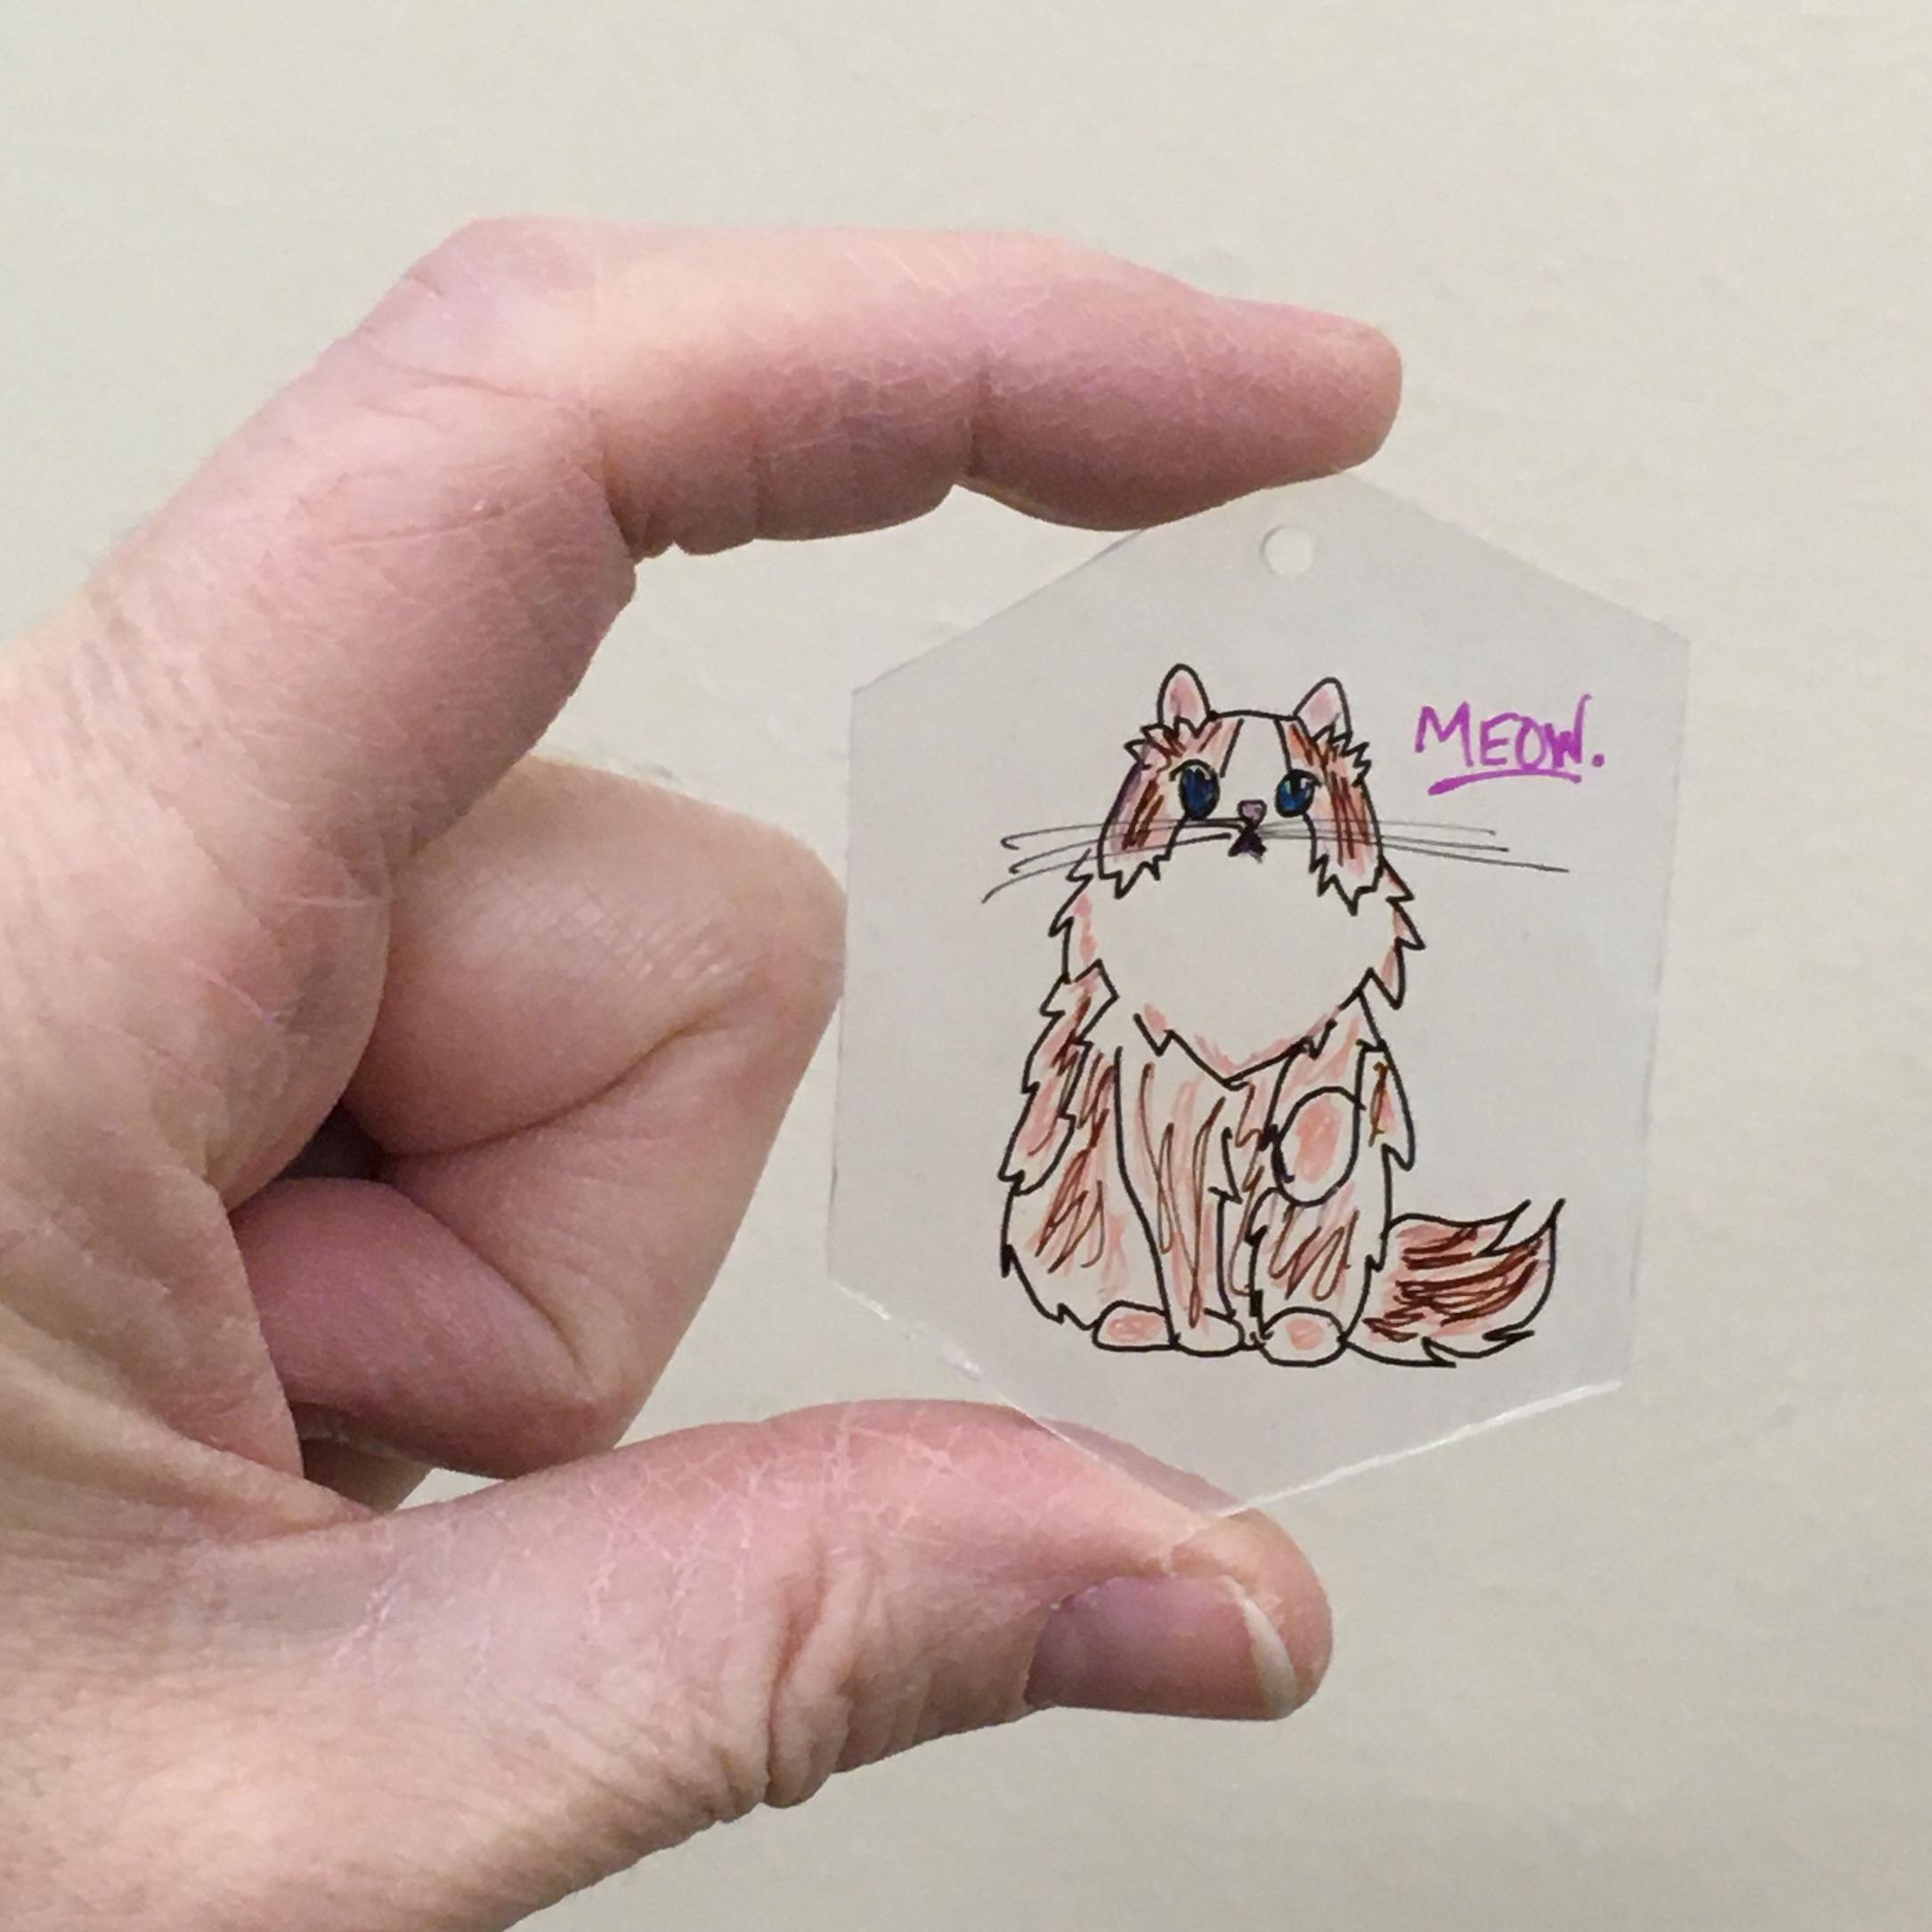 A shrinky dink of a cat